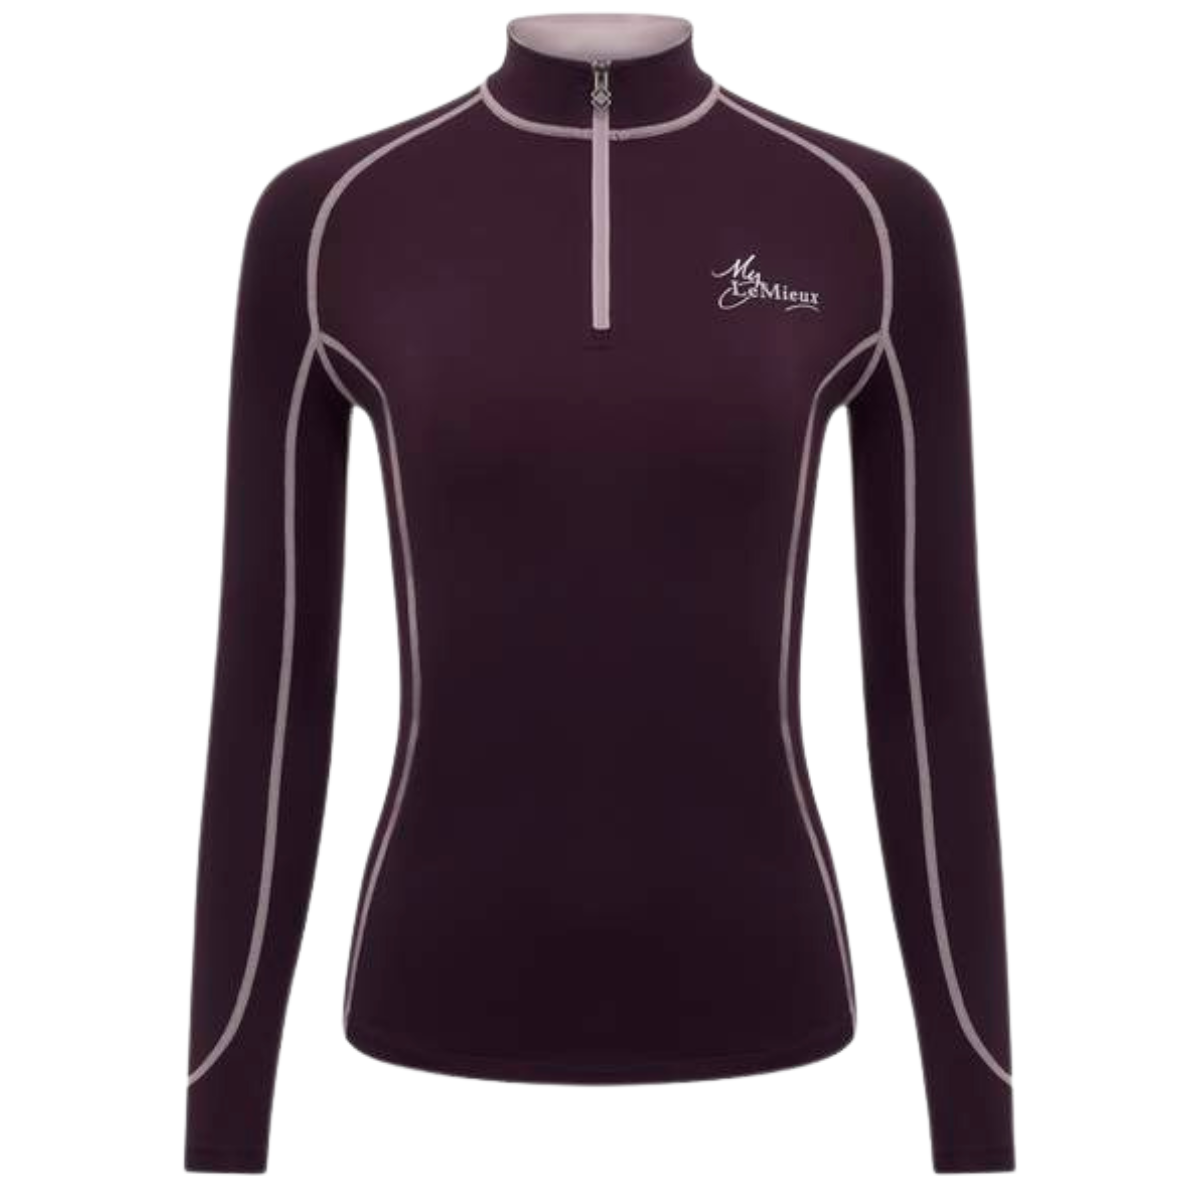 LeMieux Base Layer in Fig